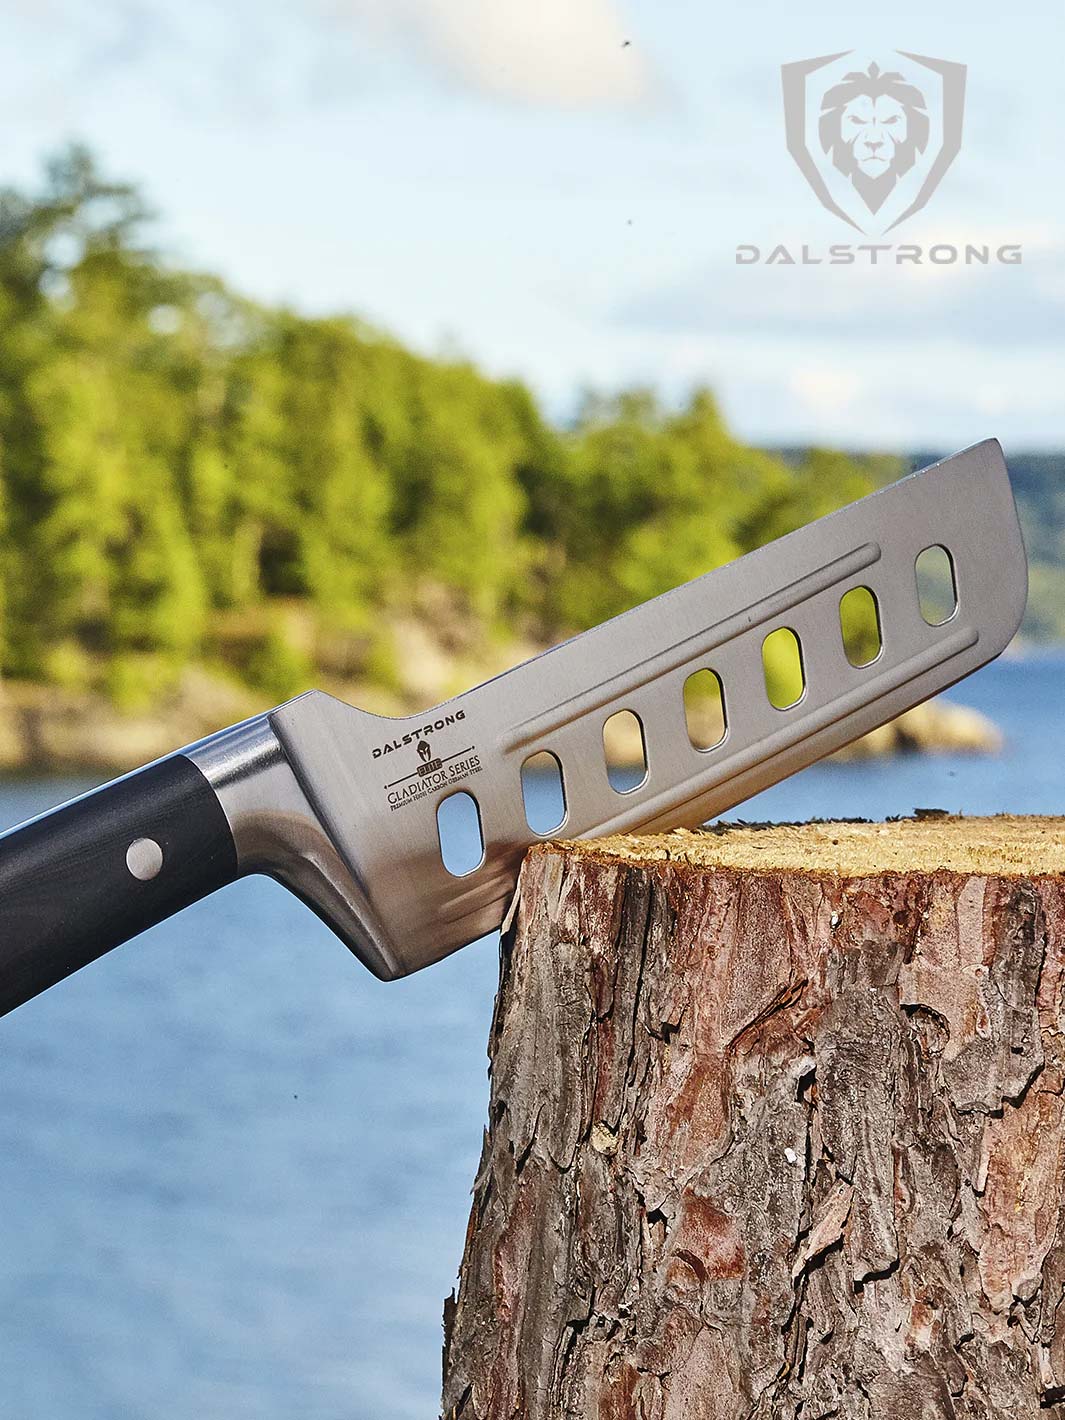 Dalstrong gladiator 6 inch offset nakiri knife with black handle on a log.